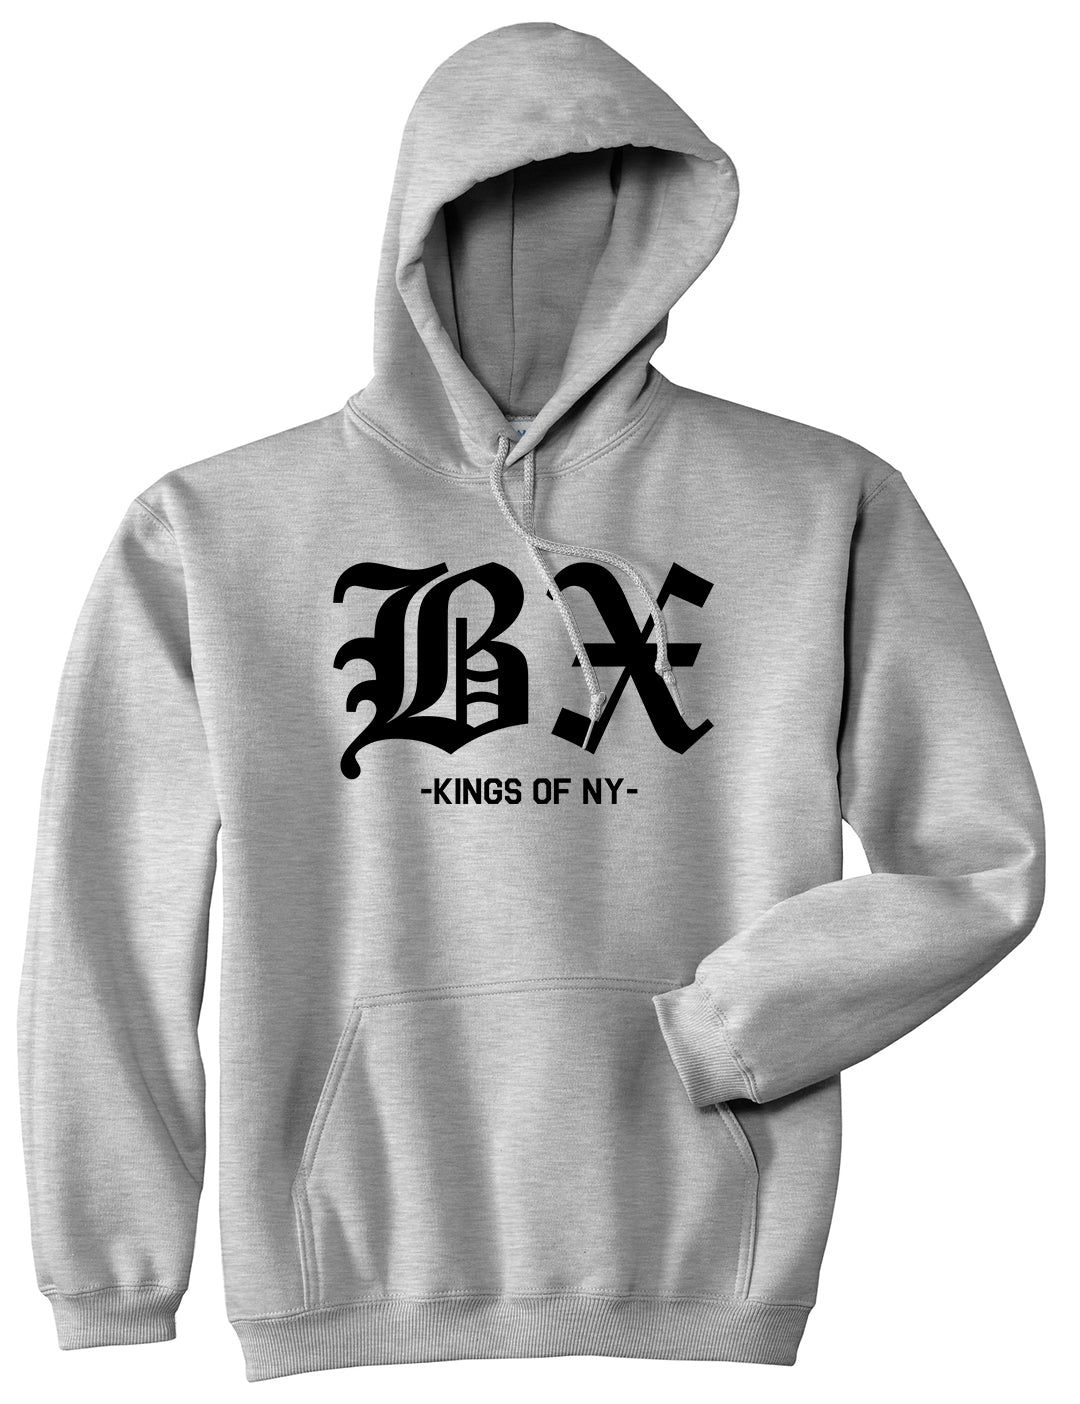 BX Old English Bronx New York Pullover Hoodie in Grey